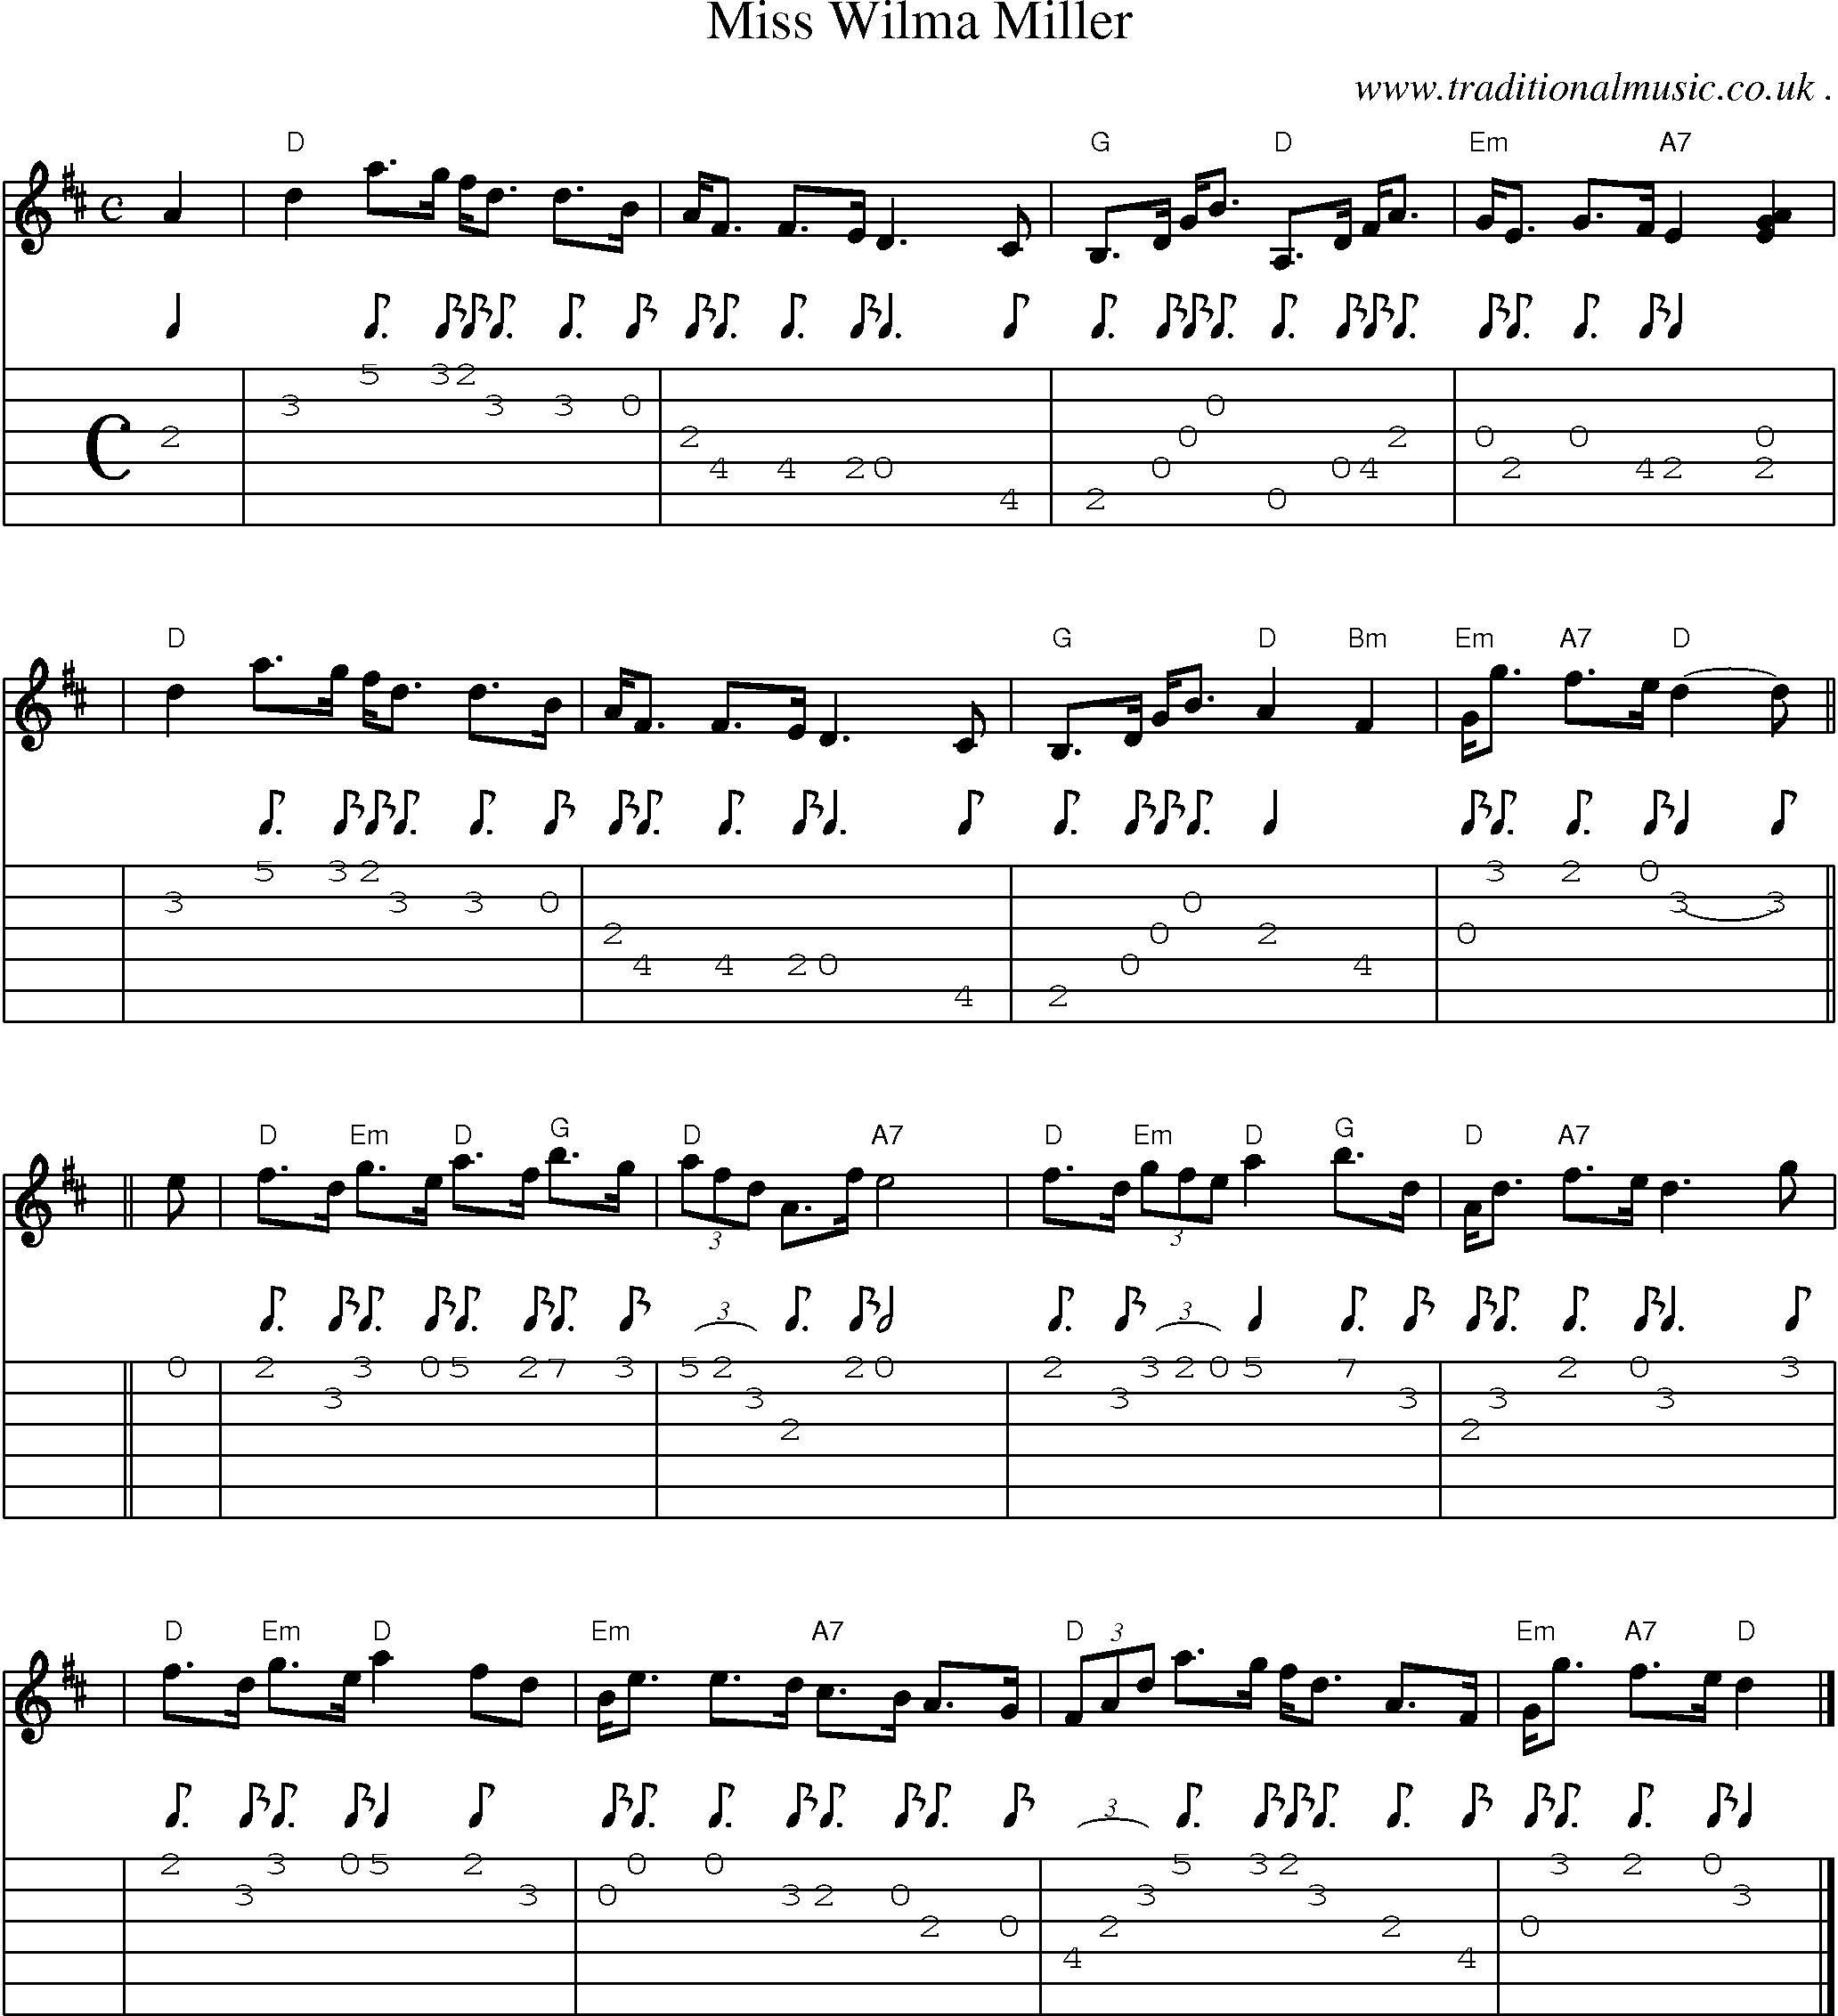 Sheet-music  score, Chords and Guitar Tabs for Miss Wilma Miller